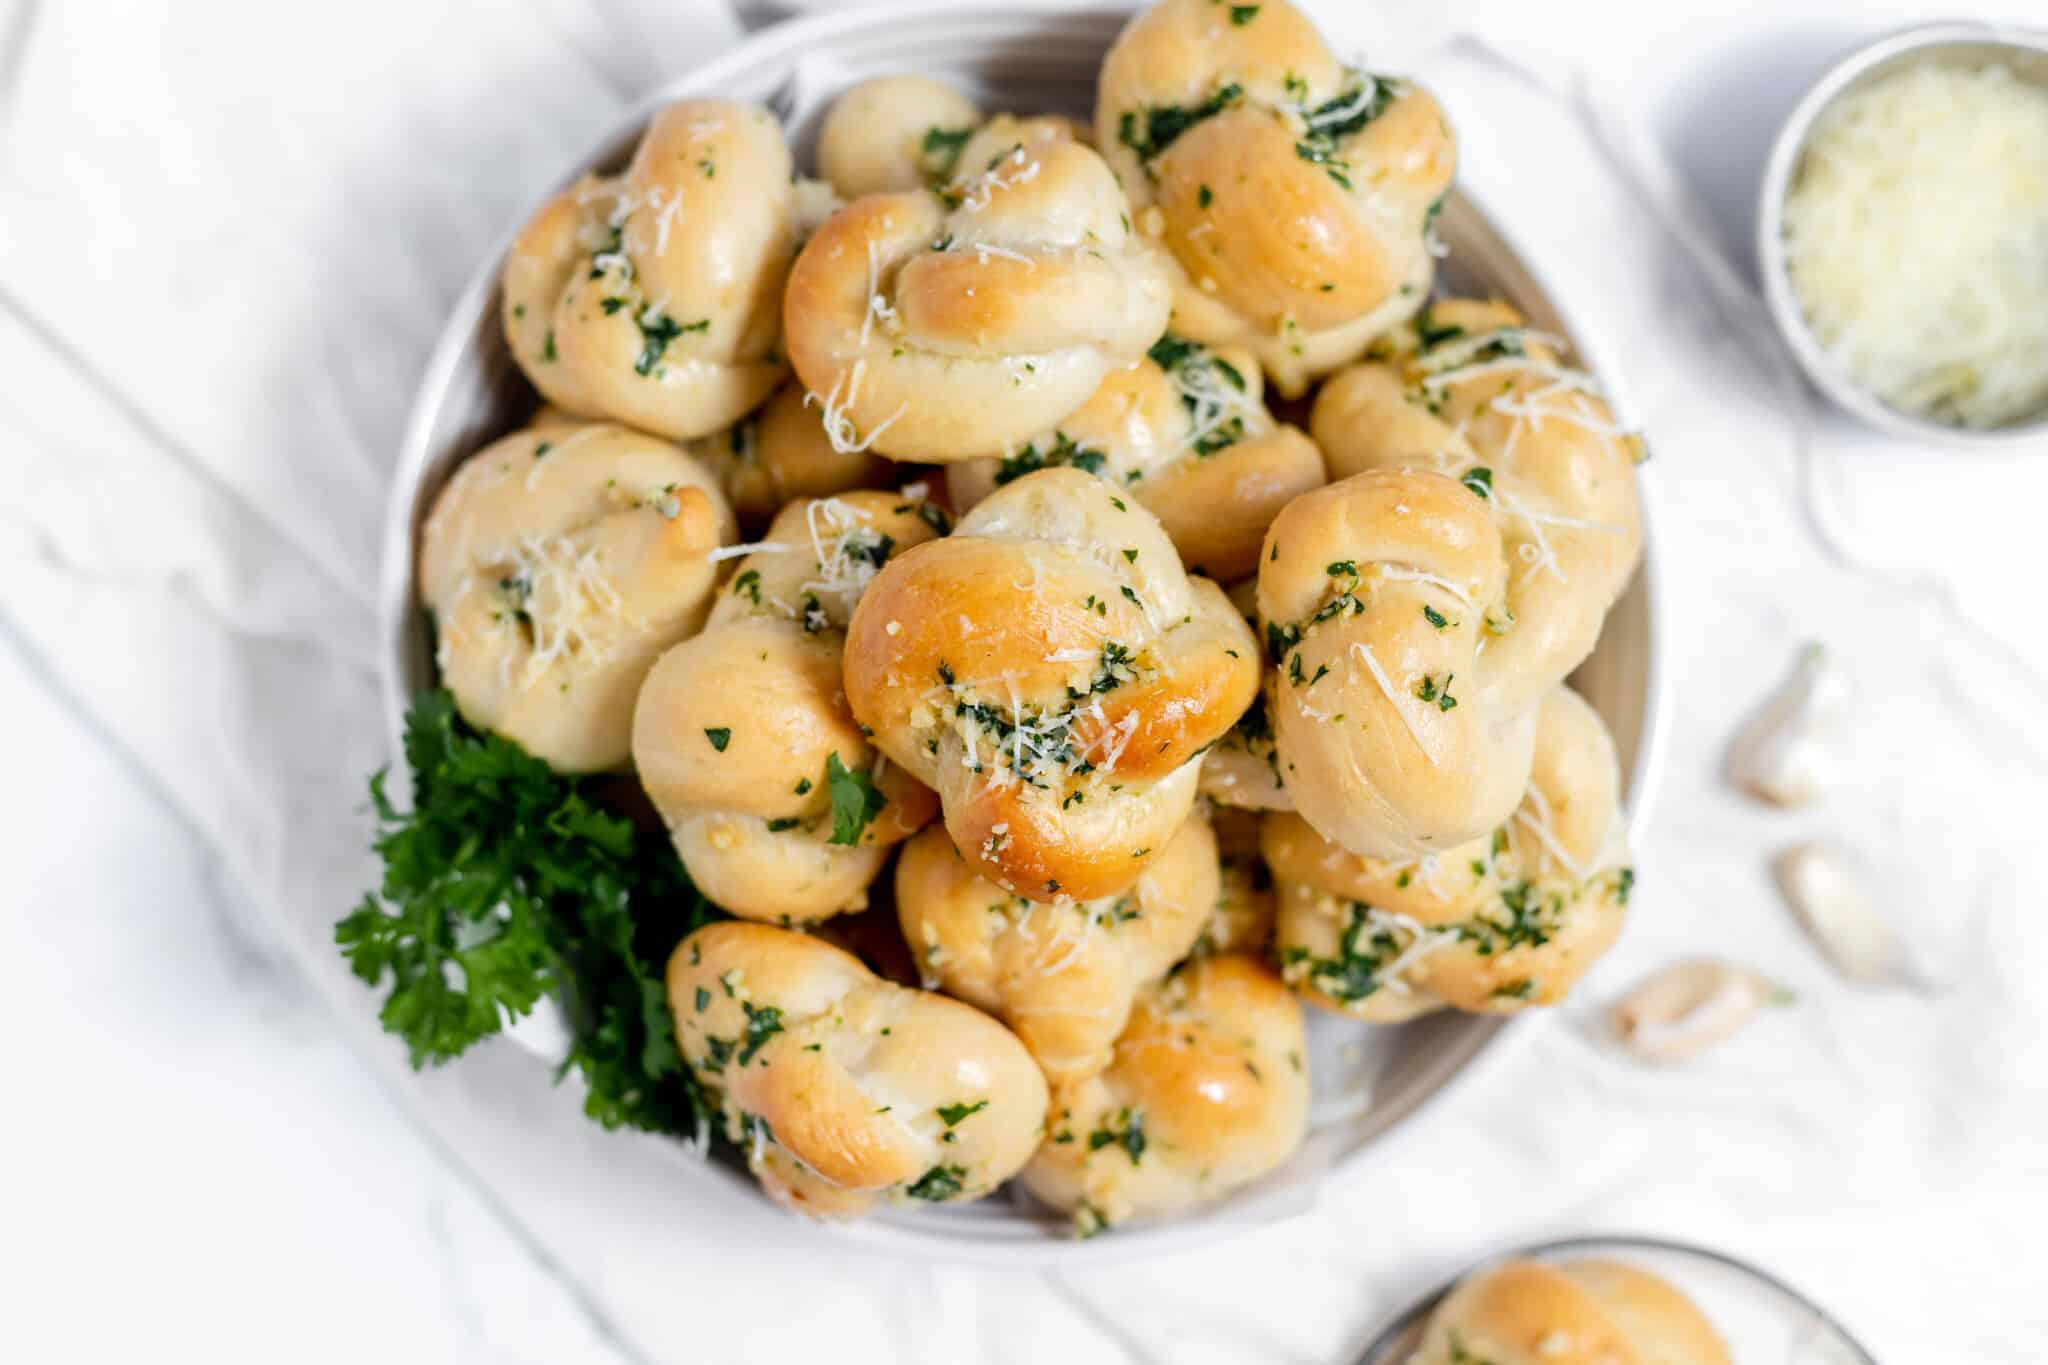 A pile of bread rolls on a plate.